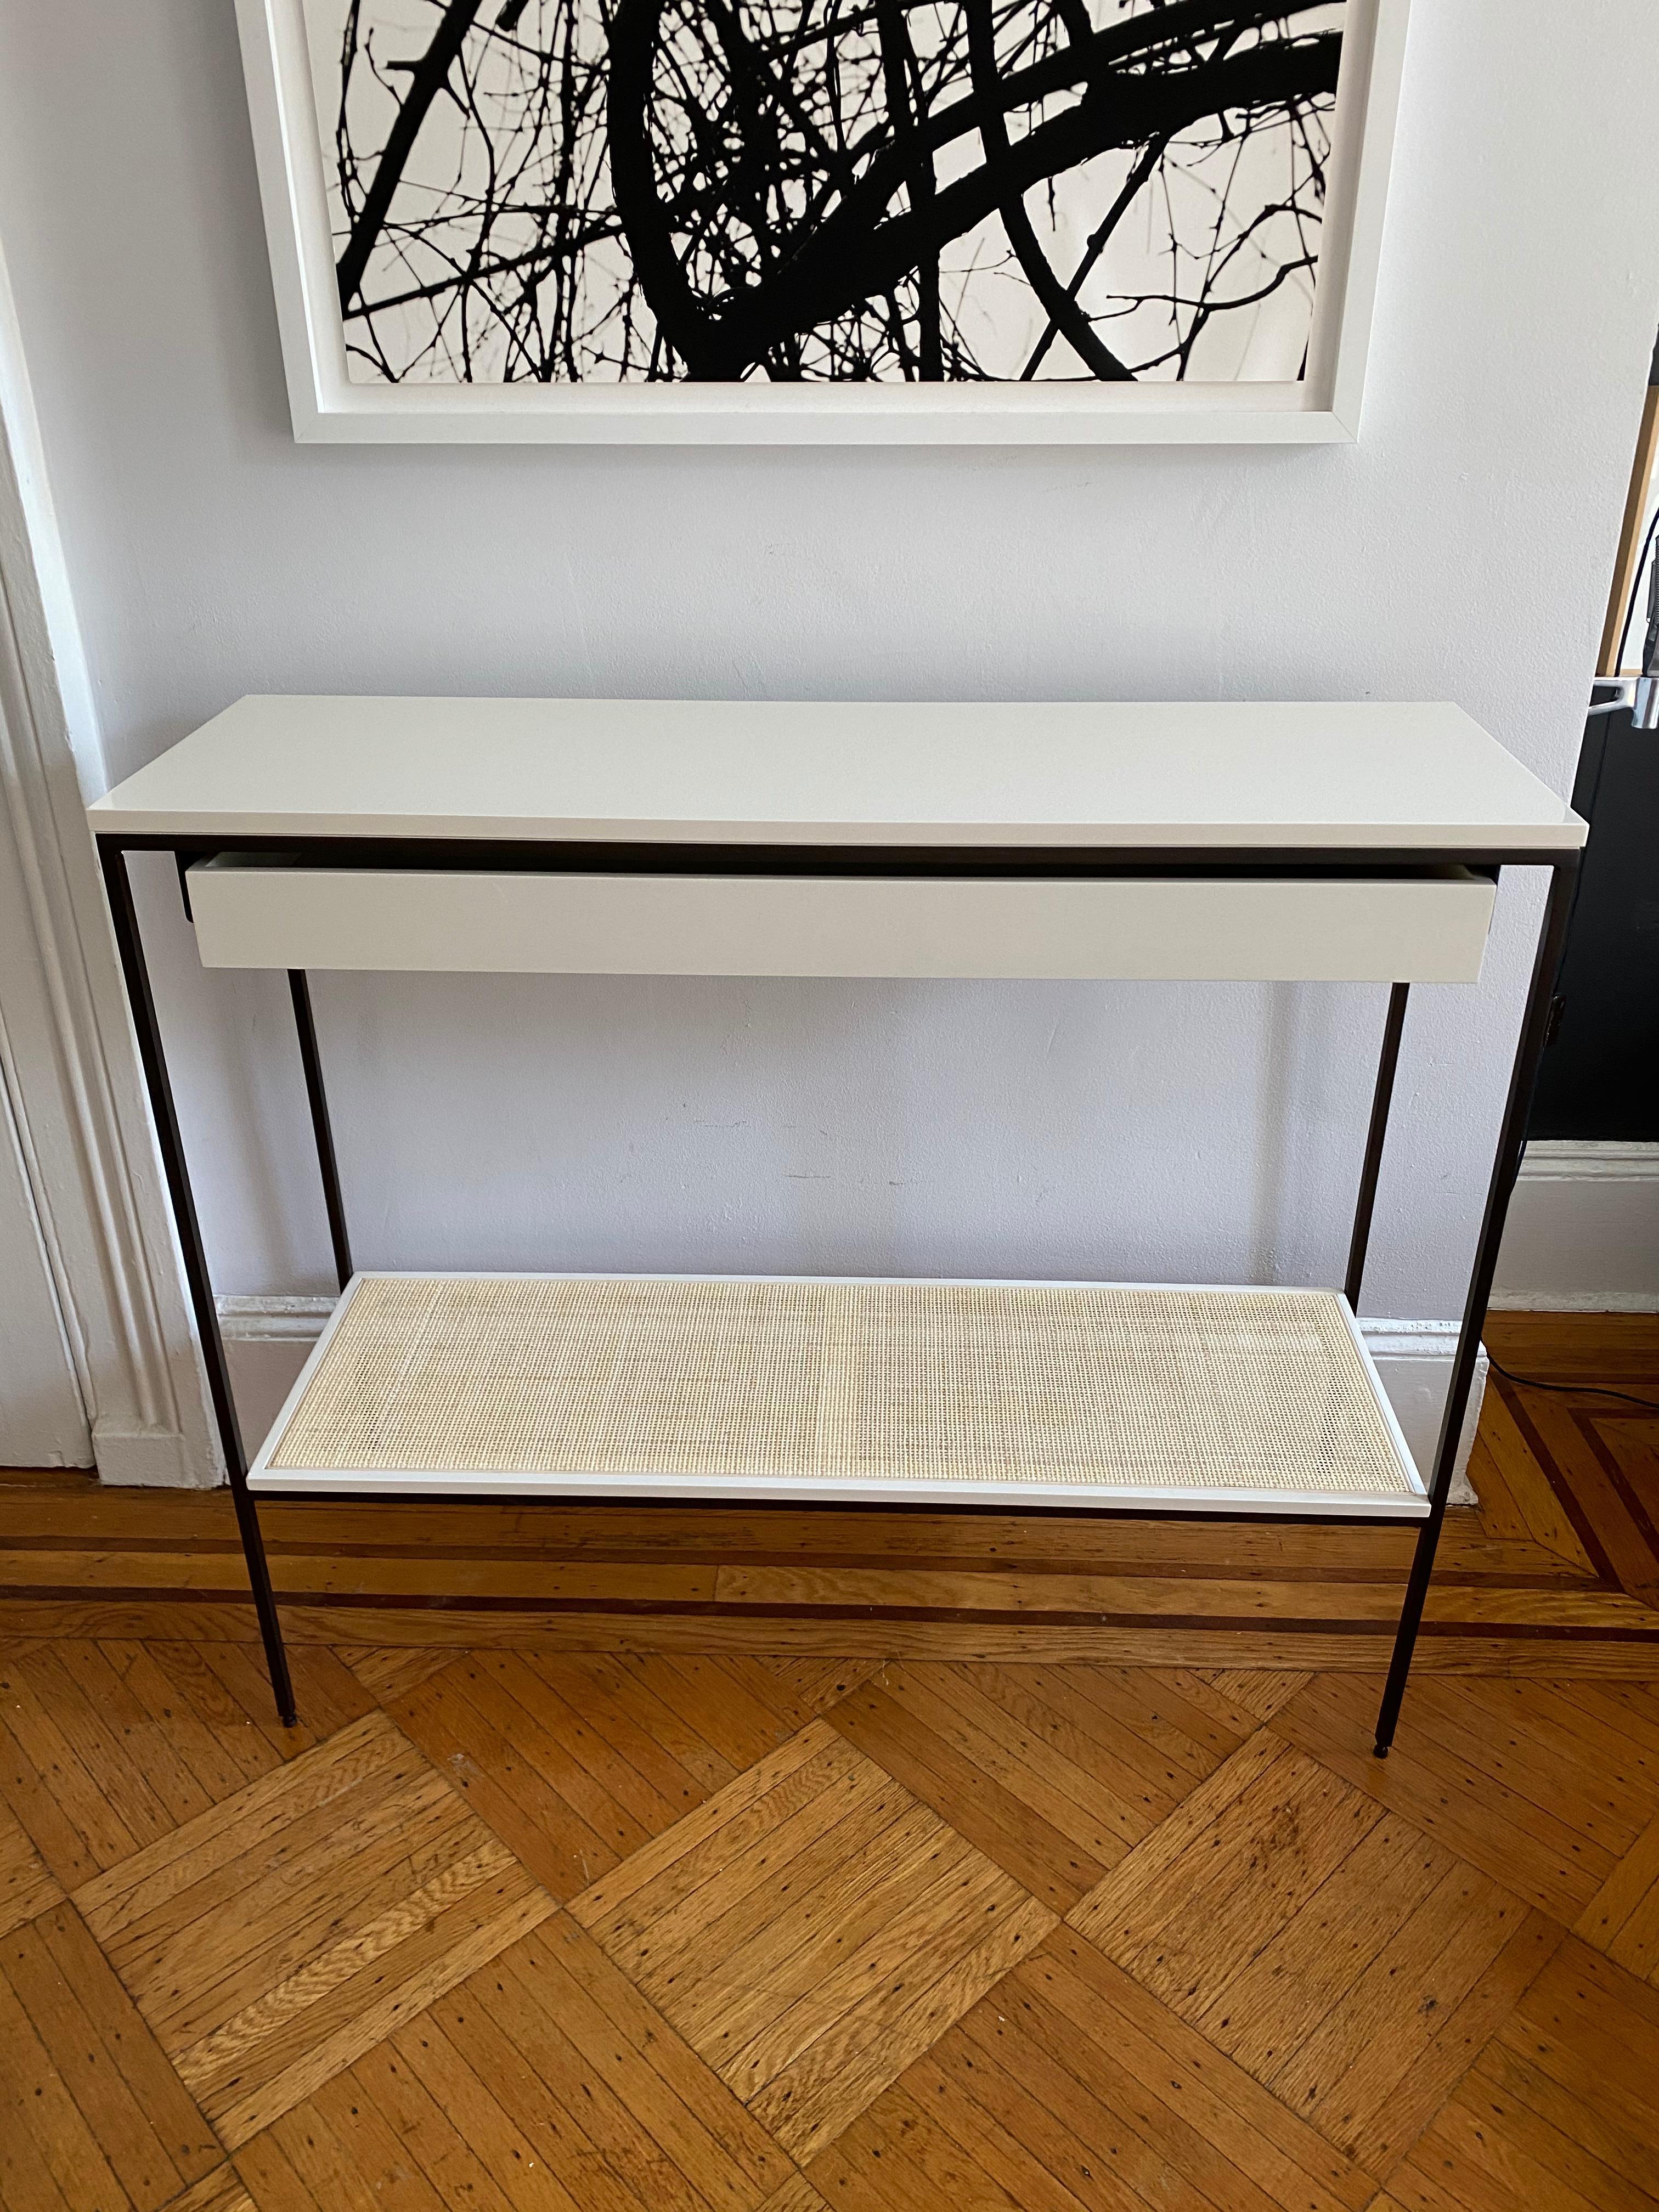 Re: 378 console table consists of lacquered components with single long drawer and caned shelf on solid oiled bronze frame. Floor model shown here in Benjamin Moore soft chamois (white) and bronze.